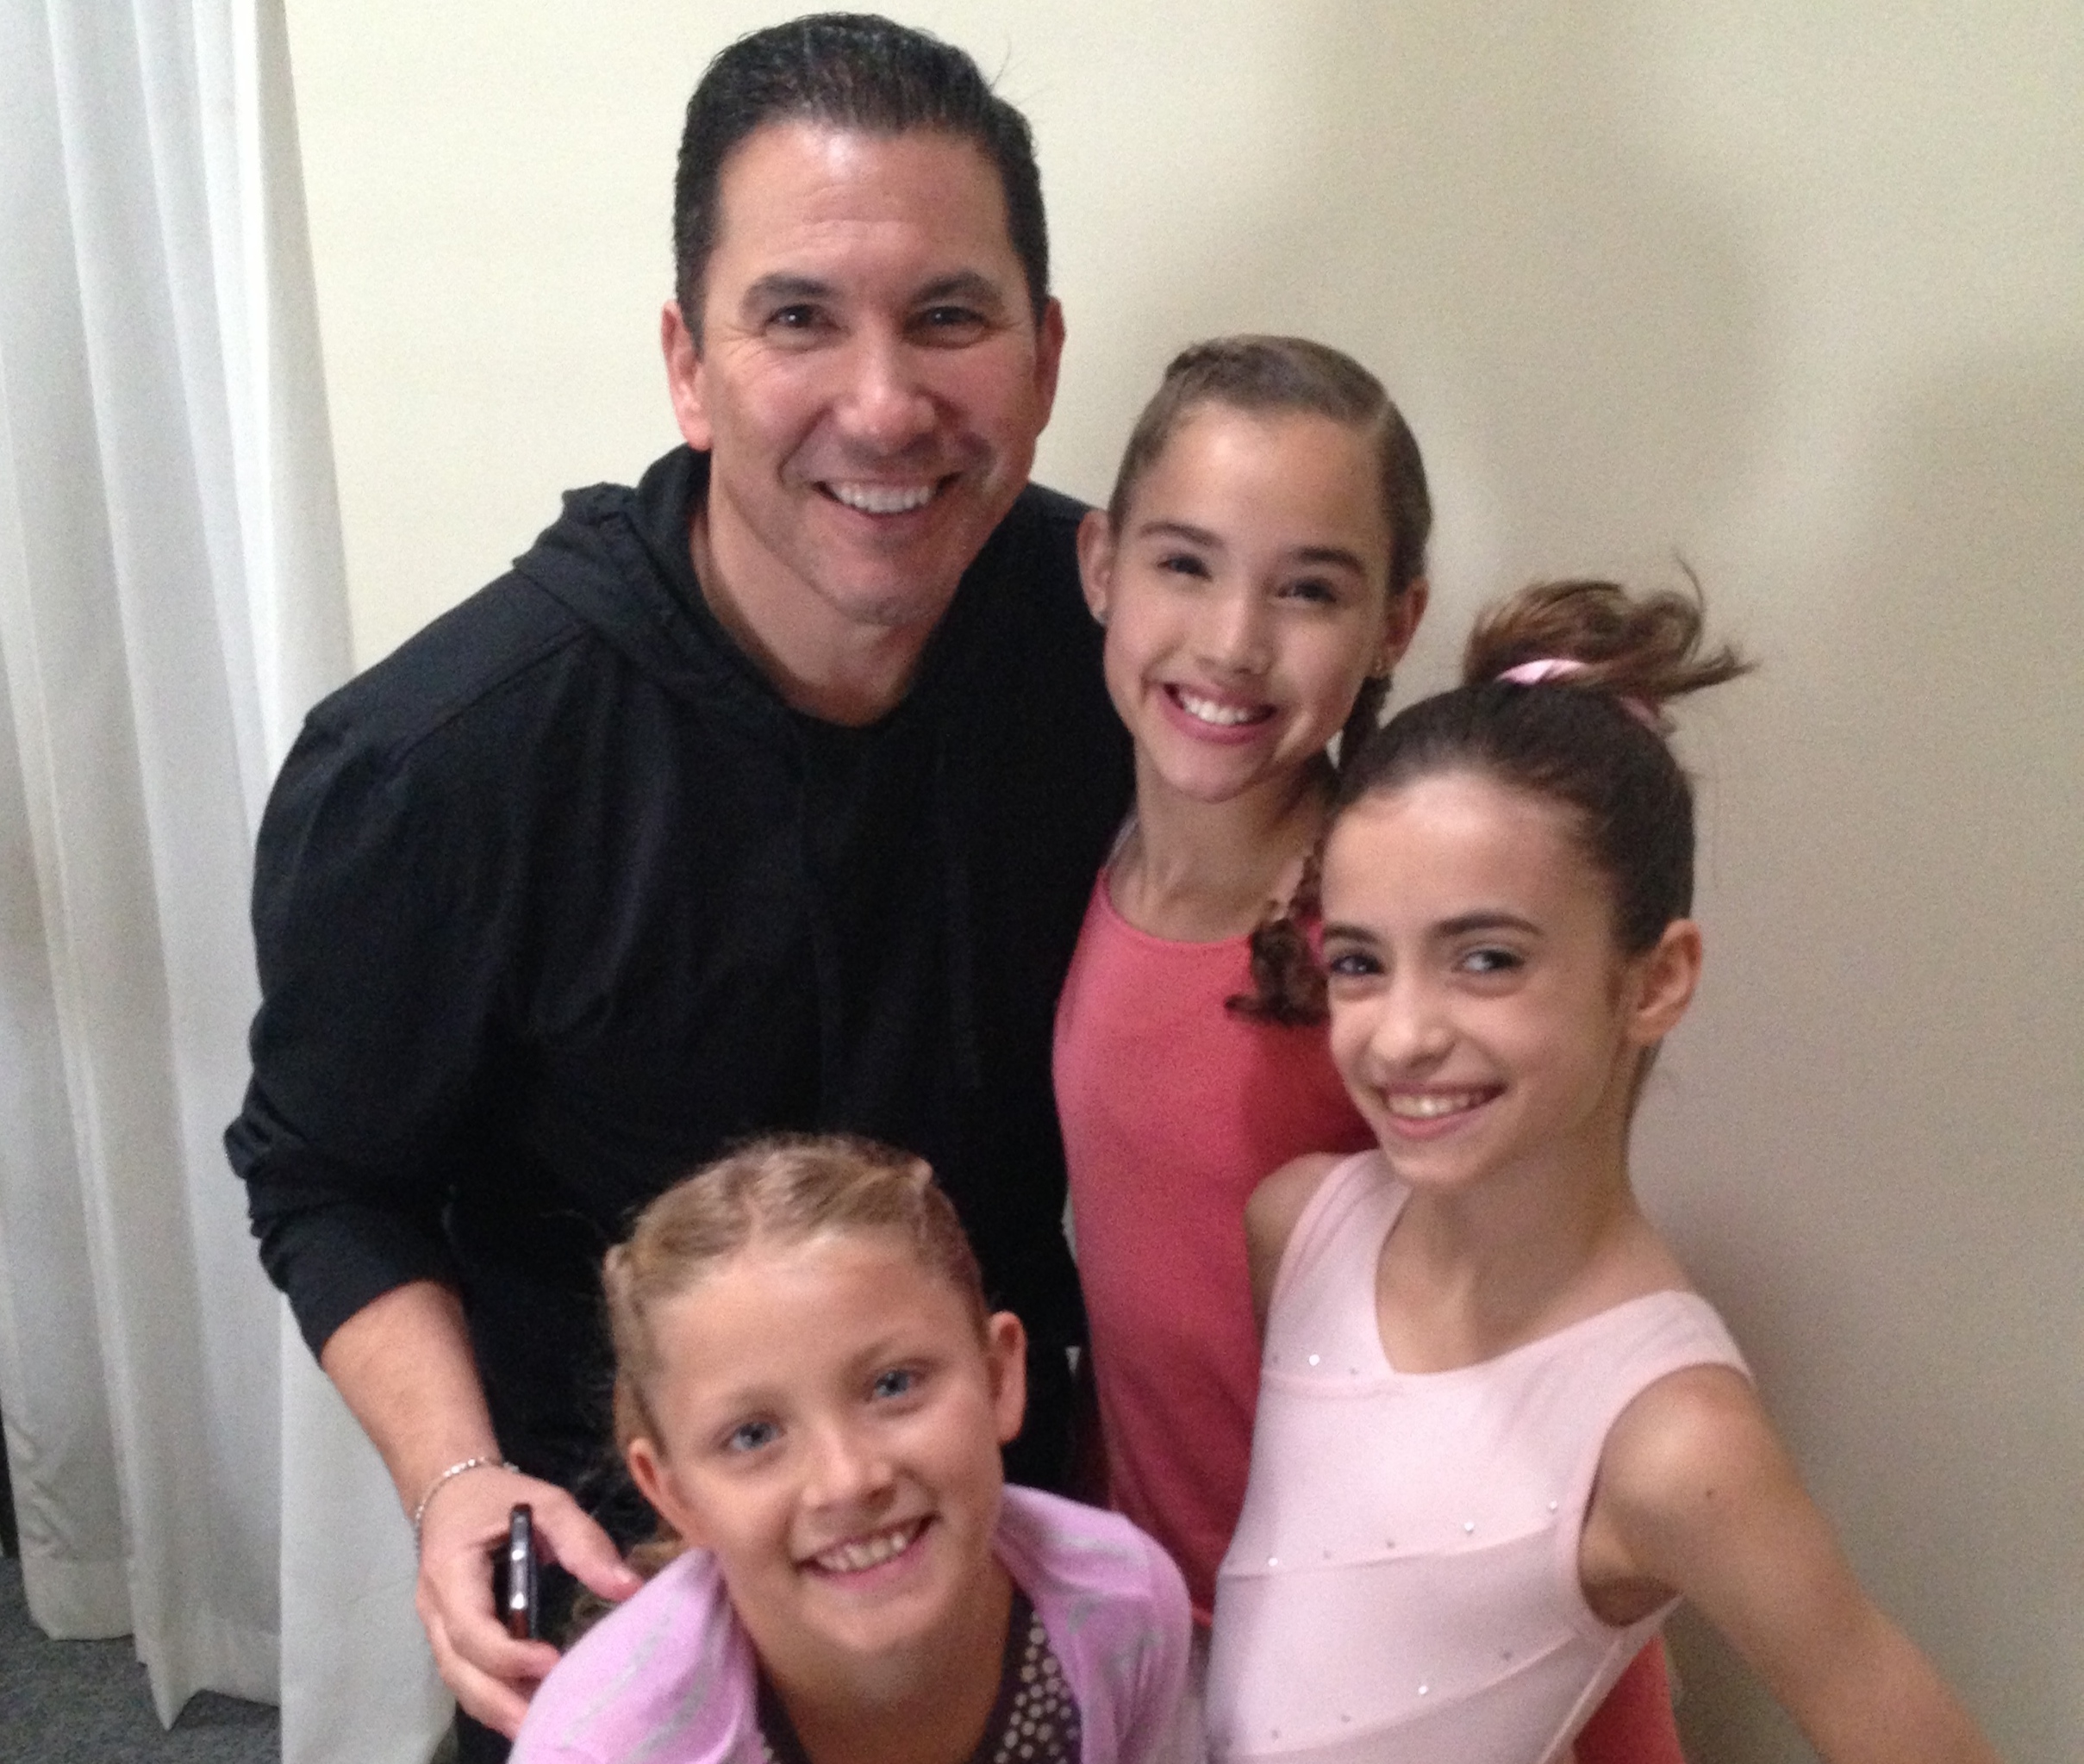 Choreographer Tony Gonzalez with actresses (L to R) Ryan Baumann, Gracie Haschak, and Soni Bringas on the set of AMERICAN GIRL - Isabelle, Girl of the Year 2014 doll commercial (Dec. 2013).